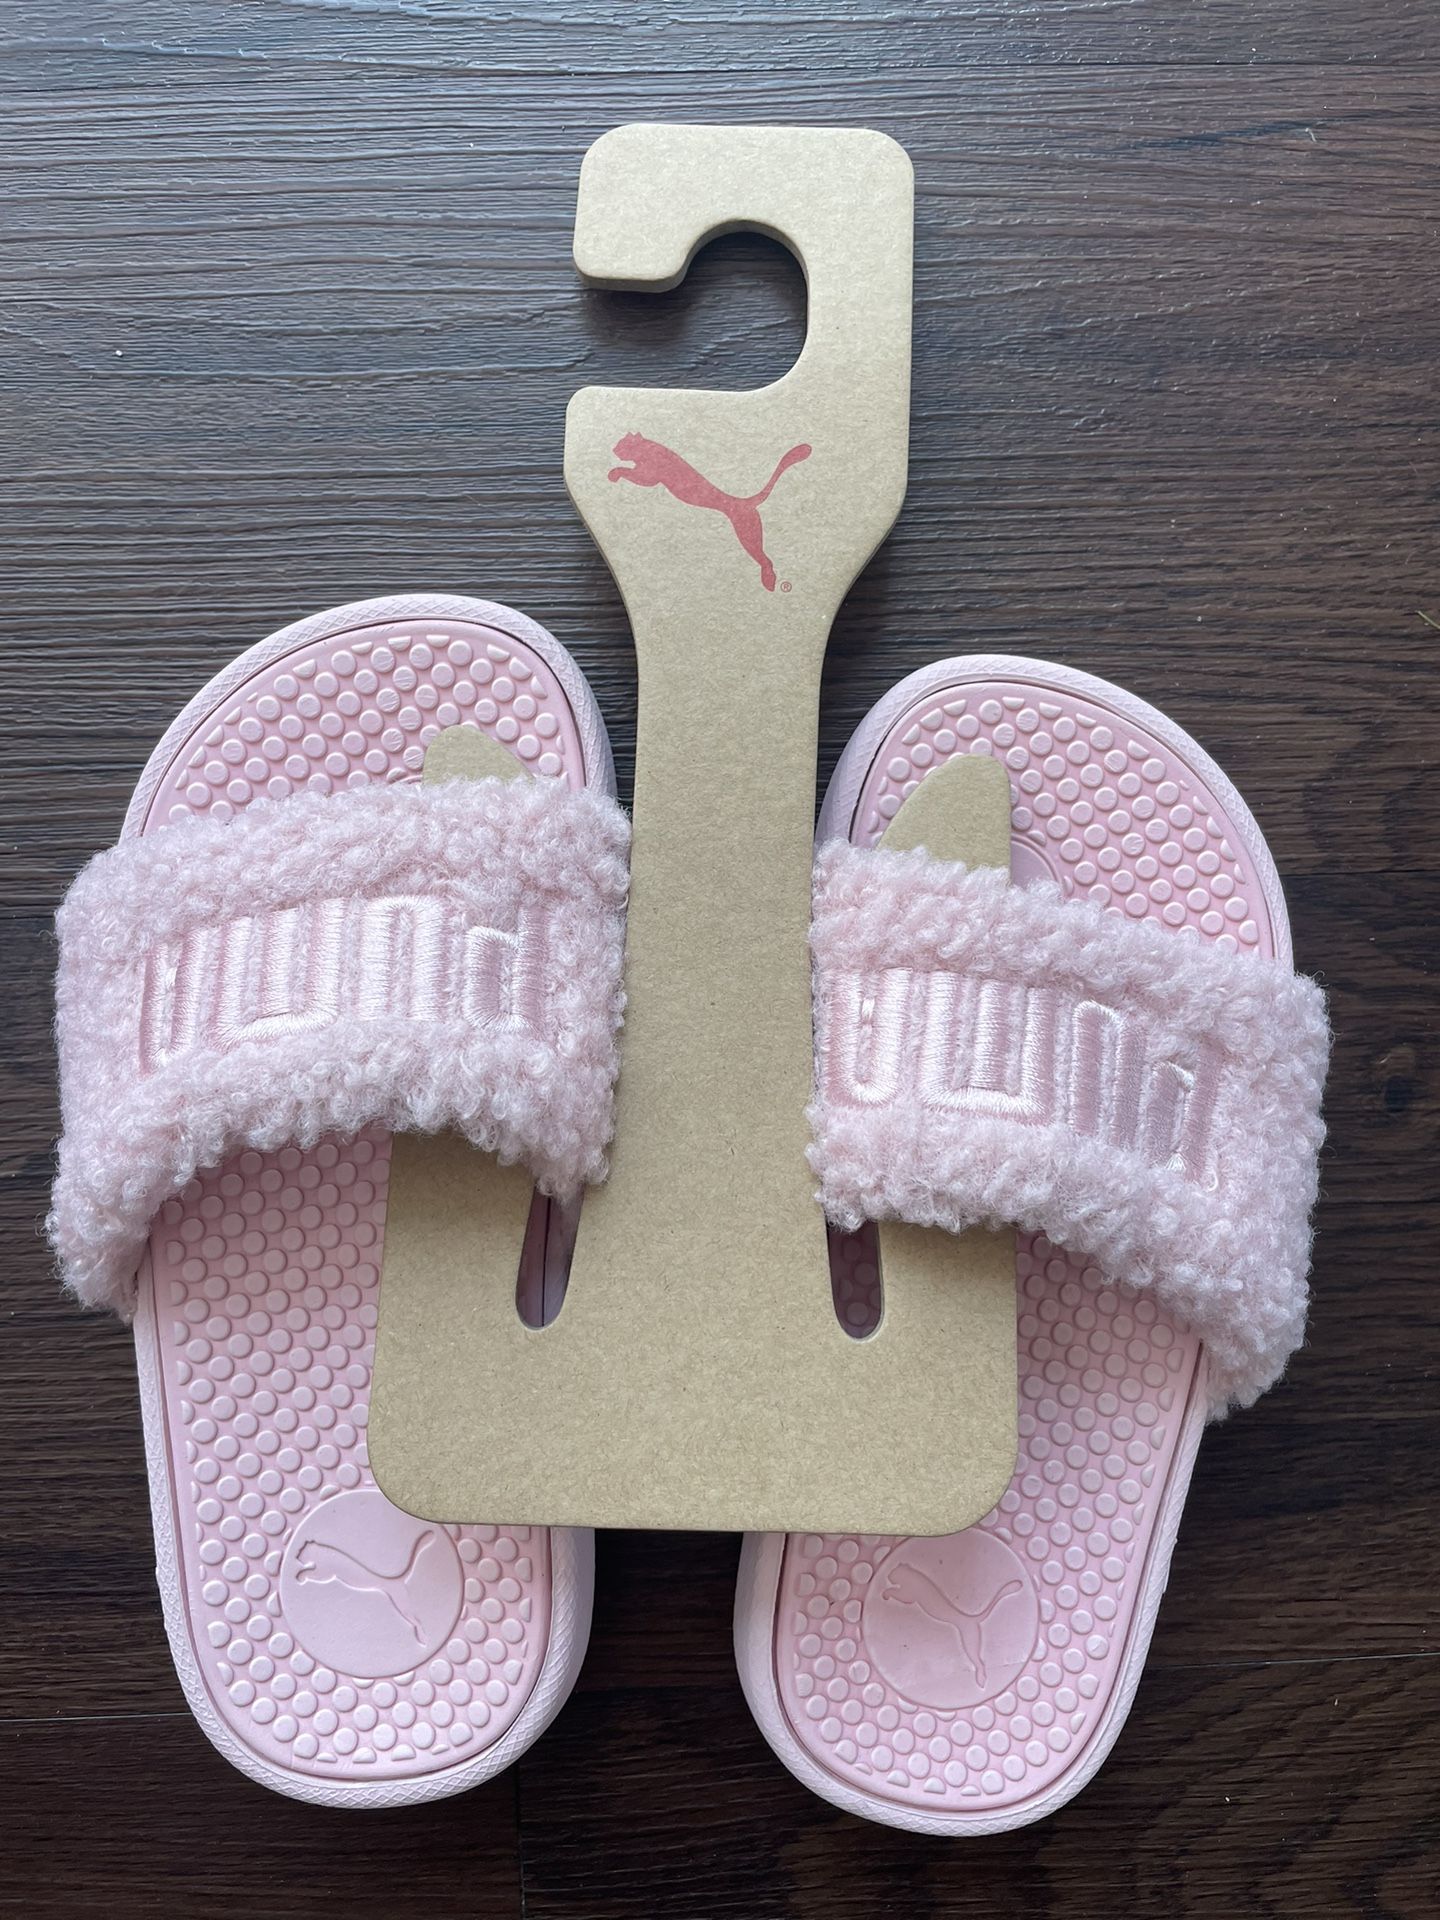 New girls sandals Puma,size 13 and 3